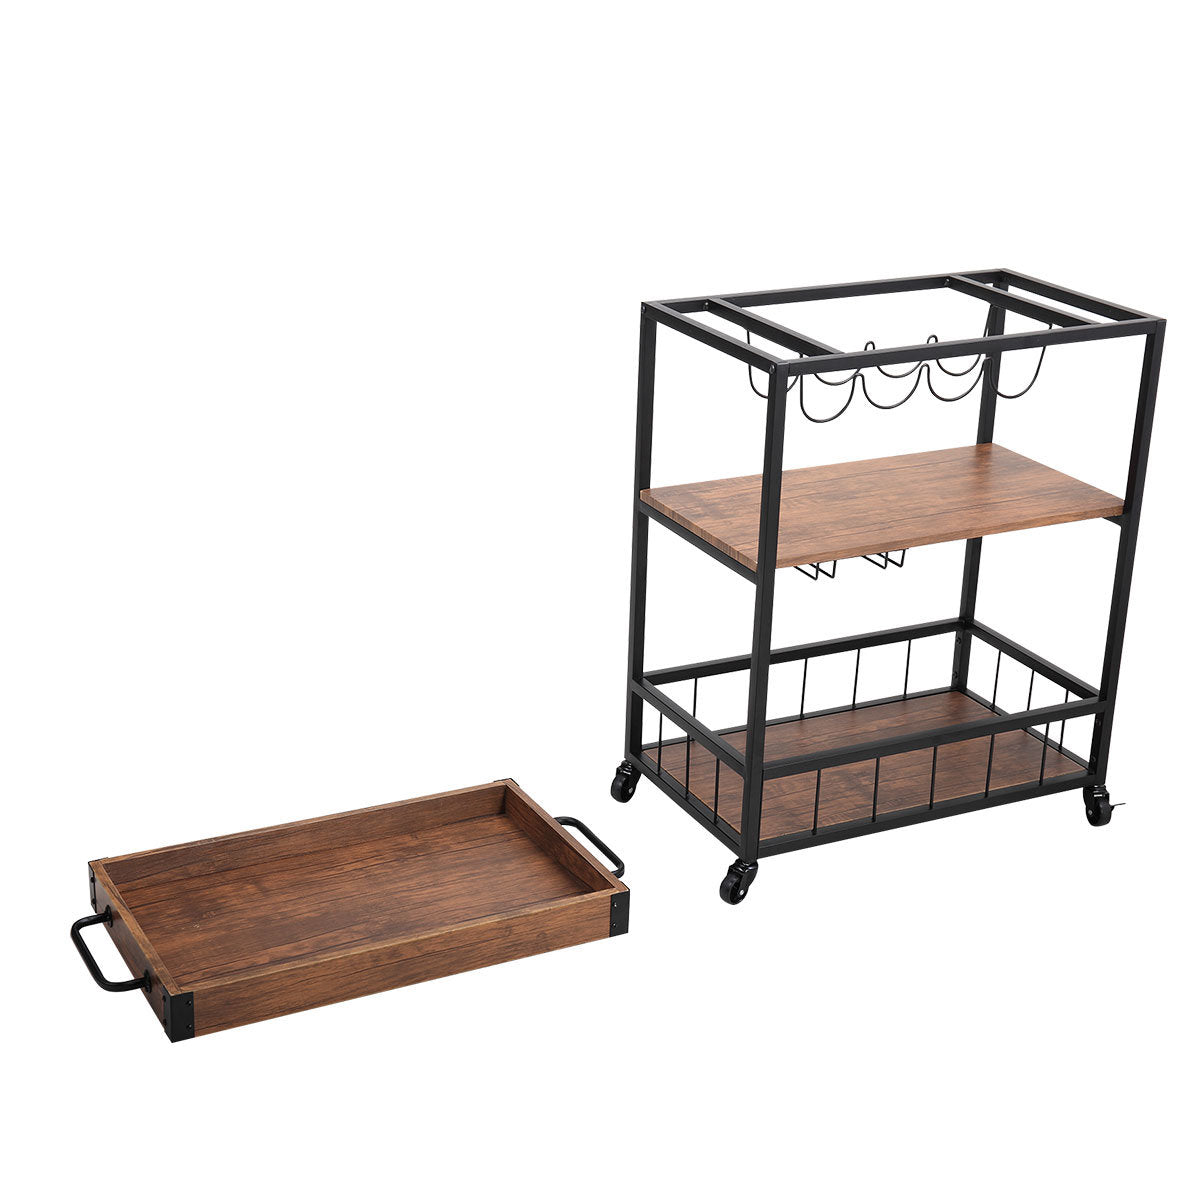 3-Tier Industrial Bar Serving Cart; Mobile Kitchen Storage Cart with Casters and Removable Tray; Wood Metal Serving Trolley for Home Dining Room; Brown and Black